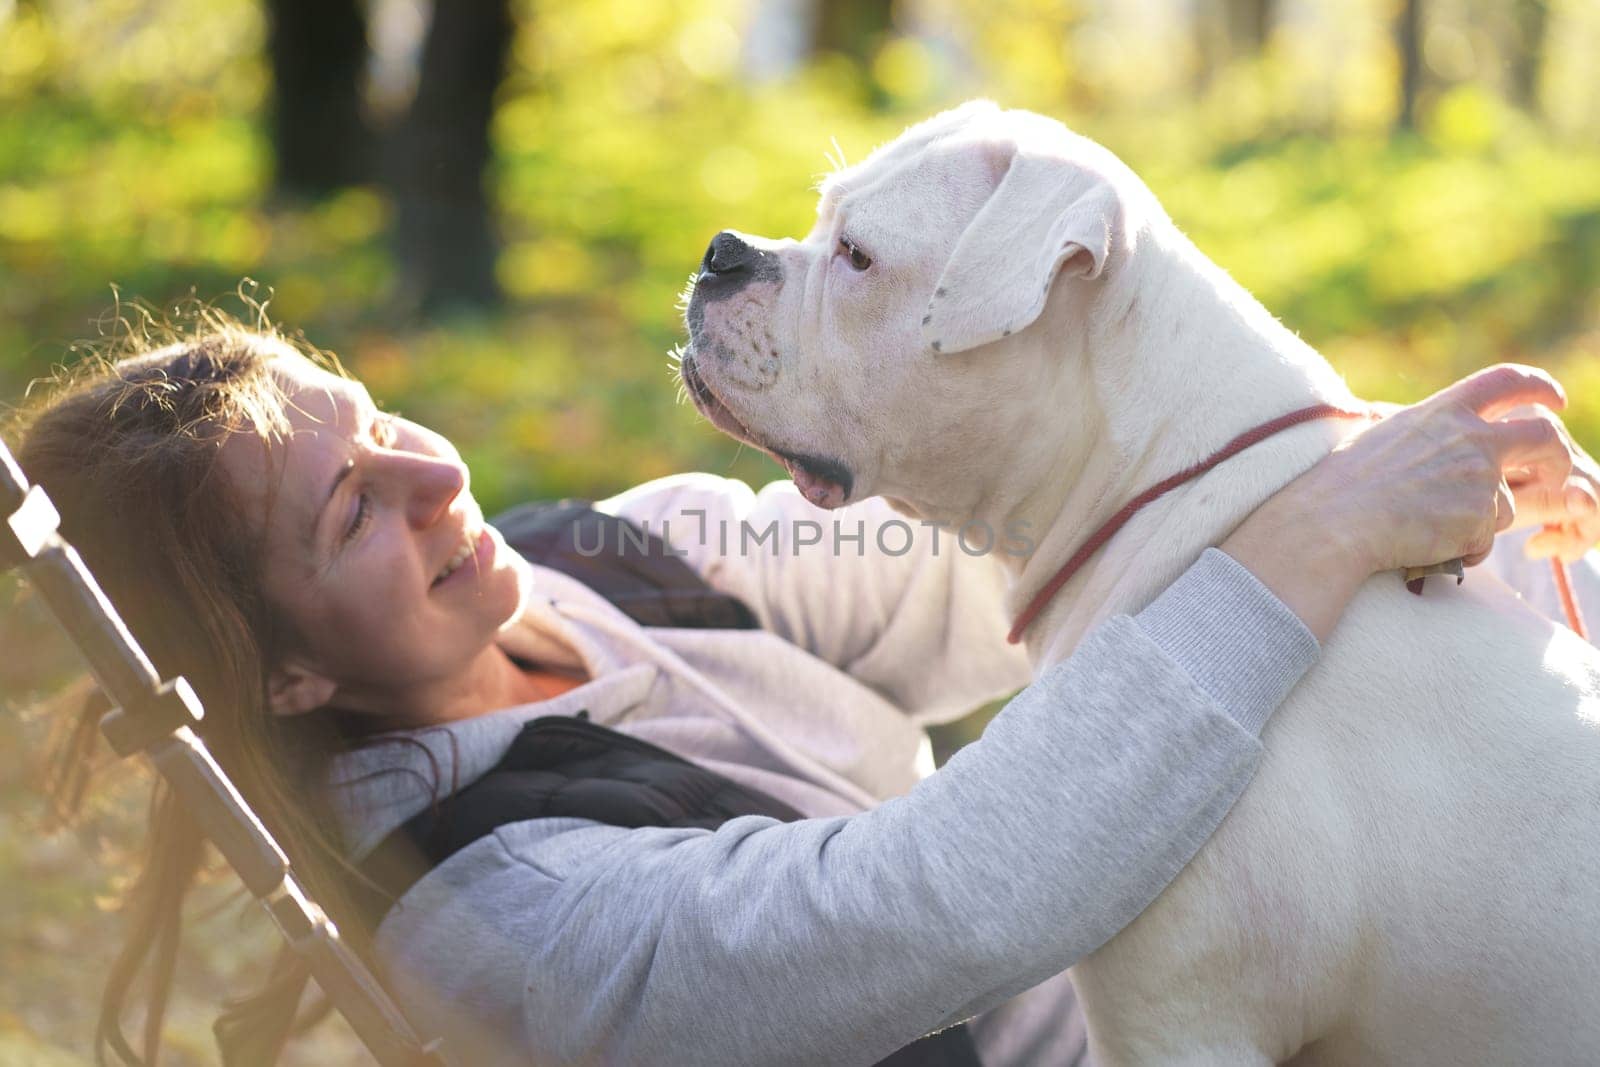 the dog plays with the mistress in the park. Close-up of a woman in a jacket and an American bulldog dog